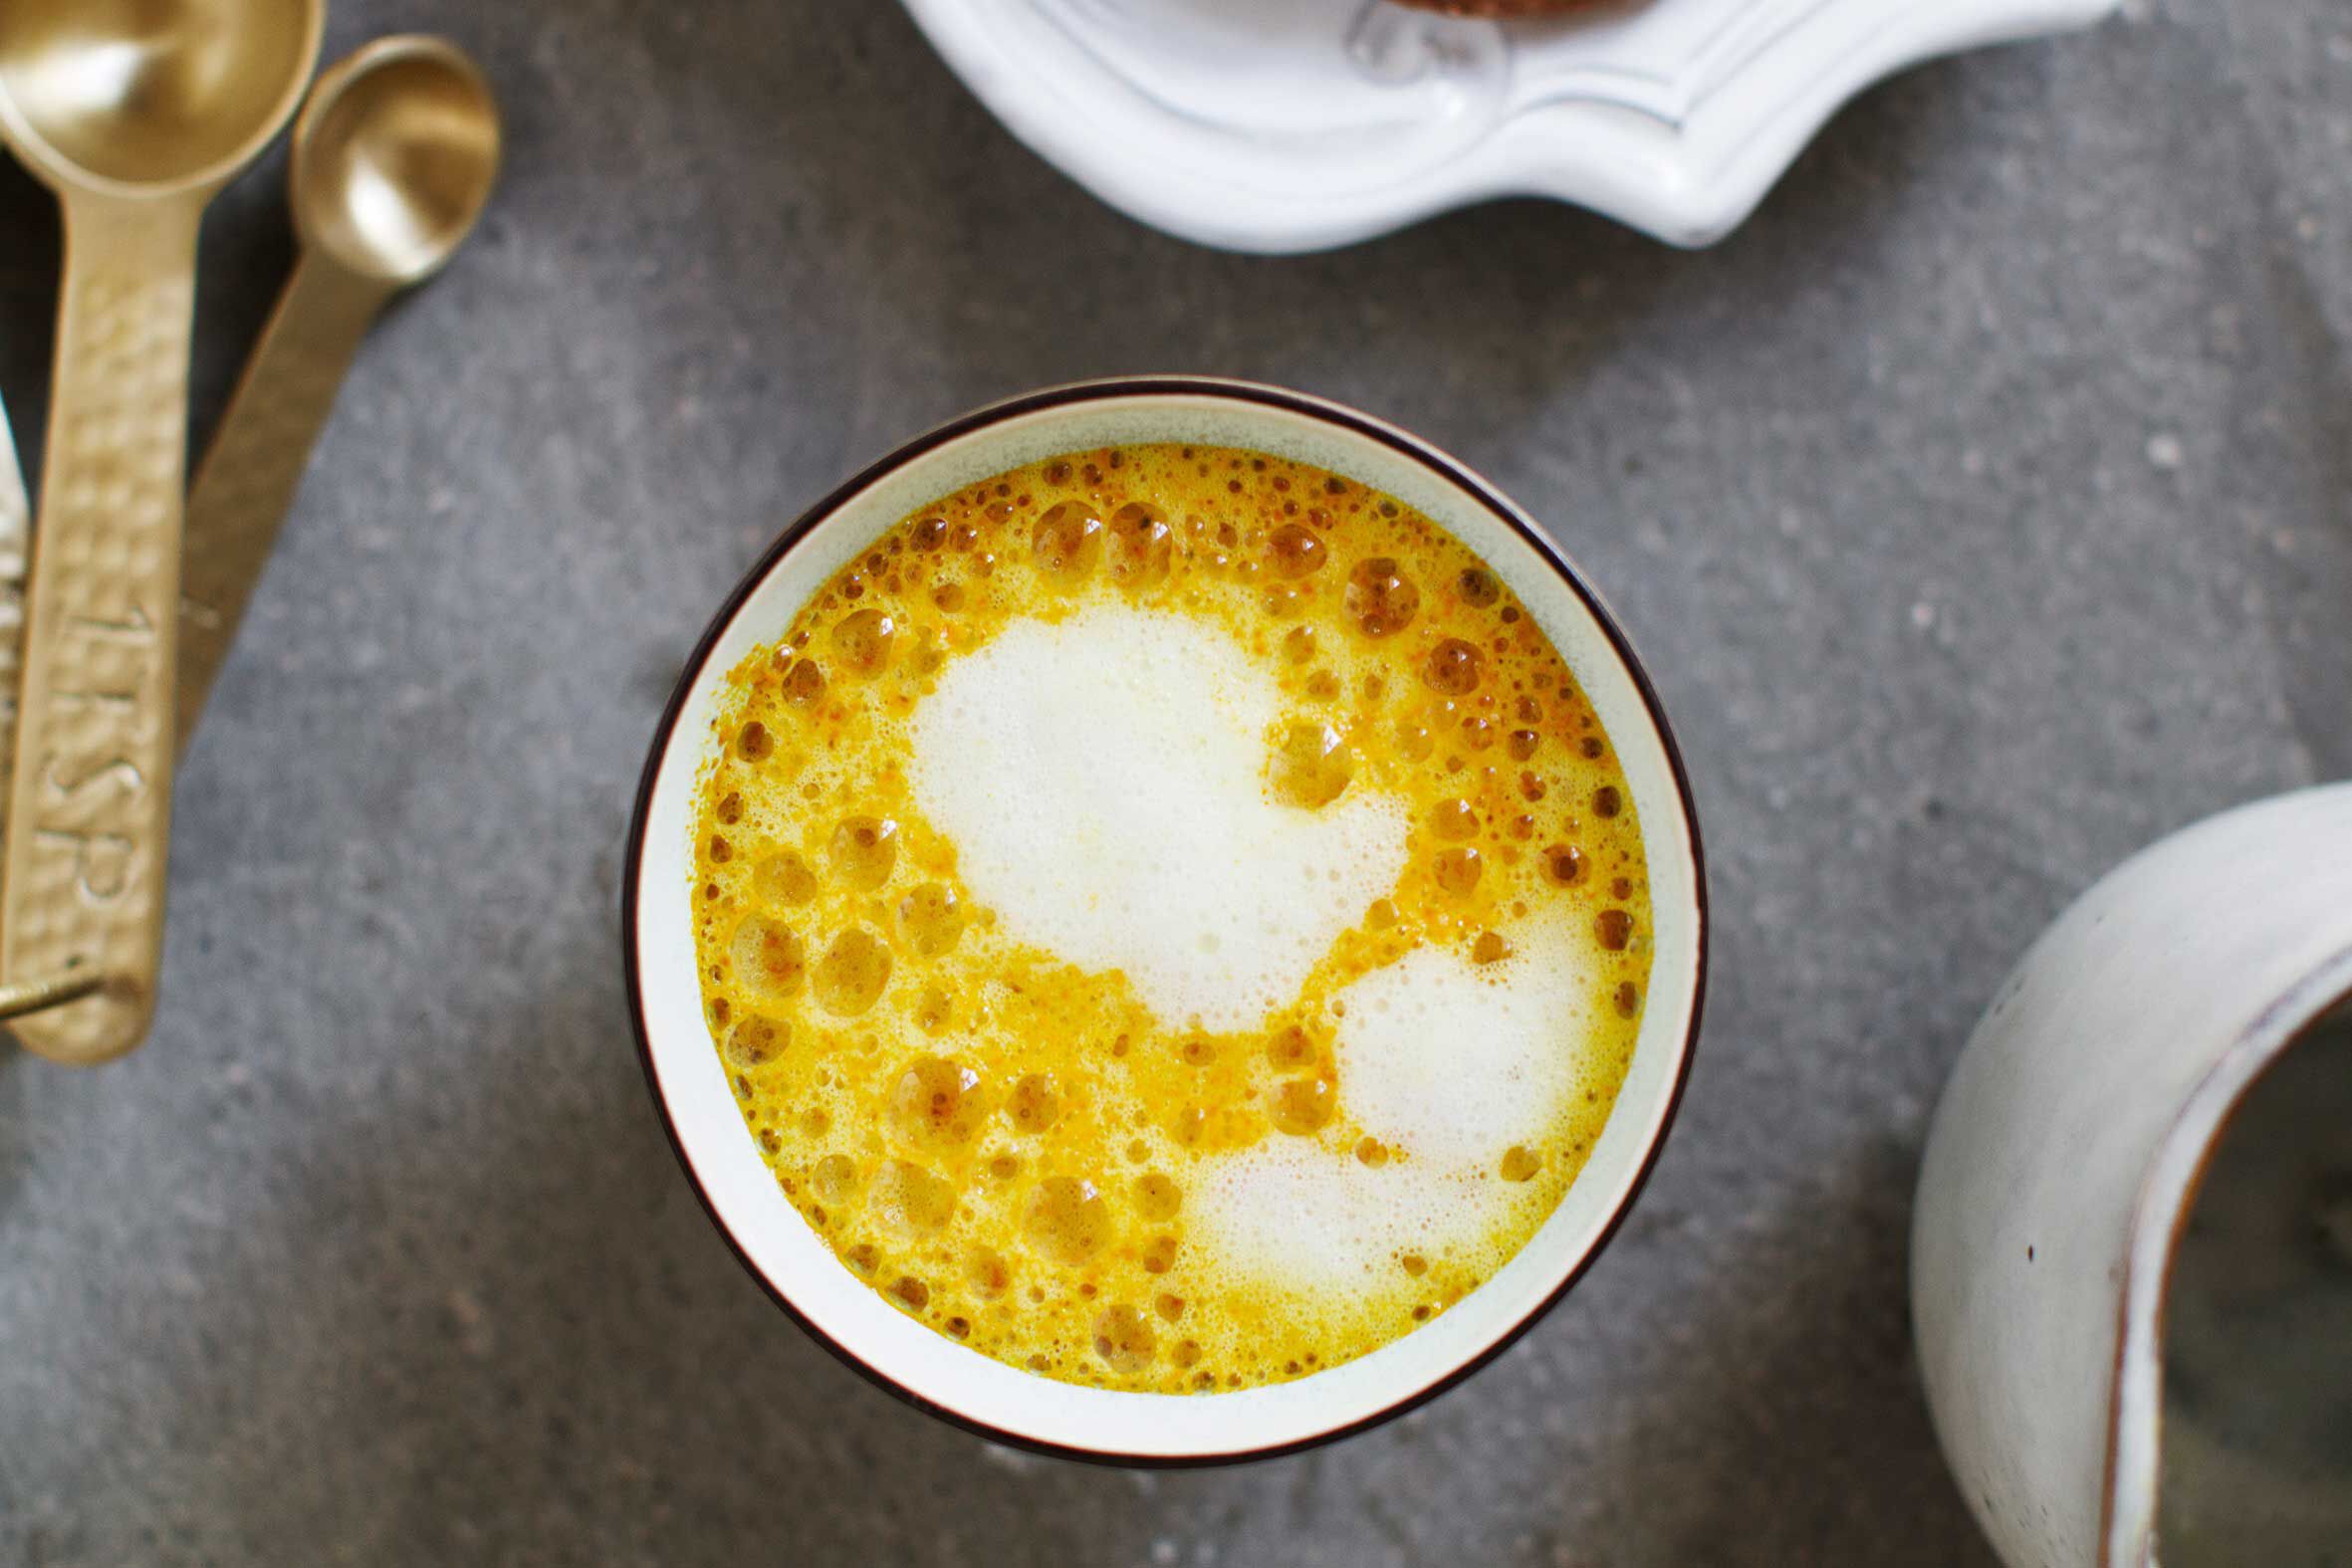 Warm up with a Golden Milk, beetroot & cocoa or chai latte